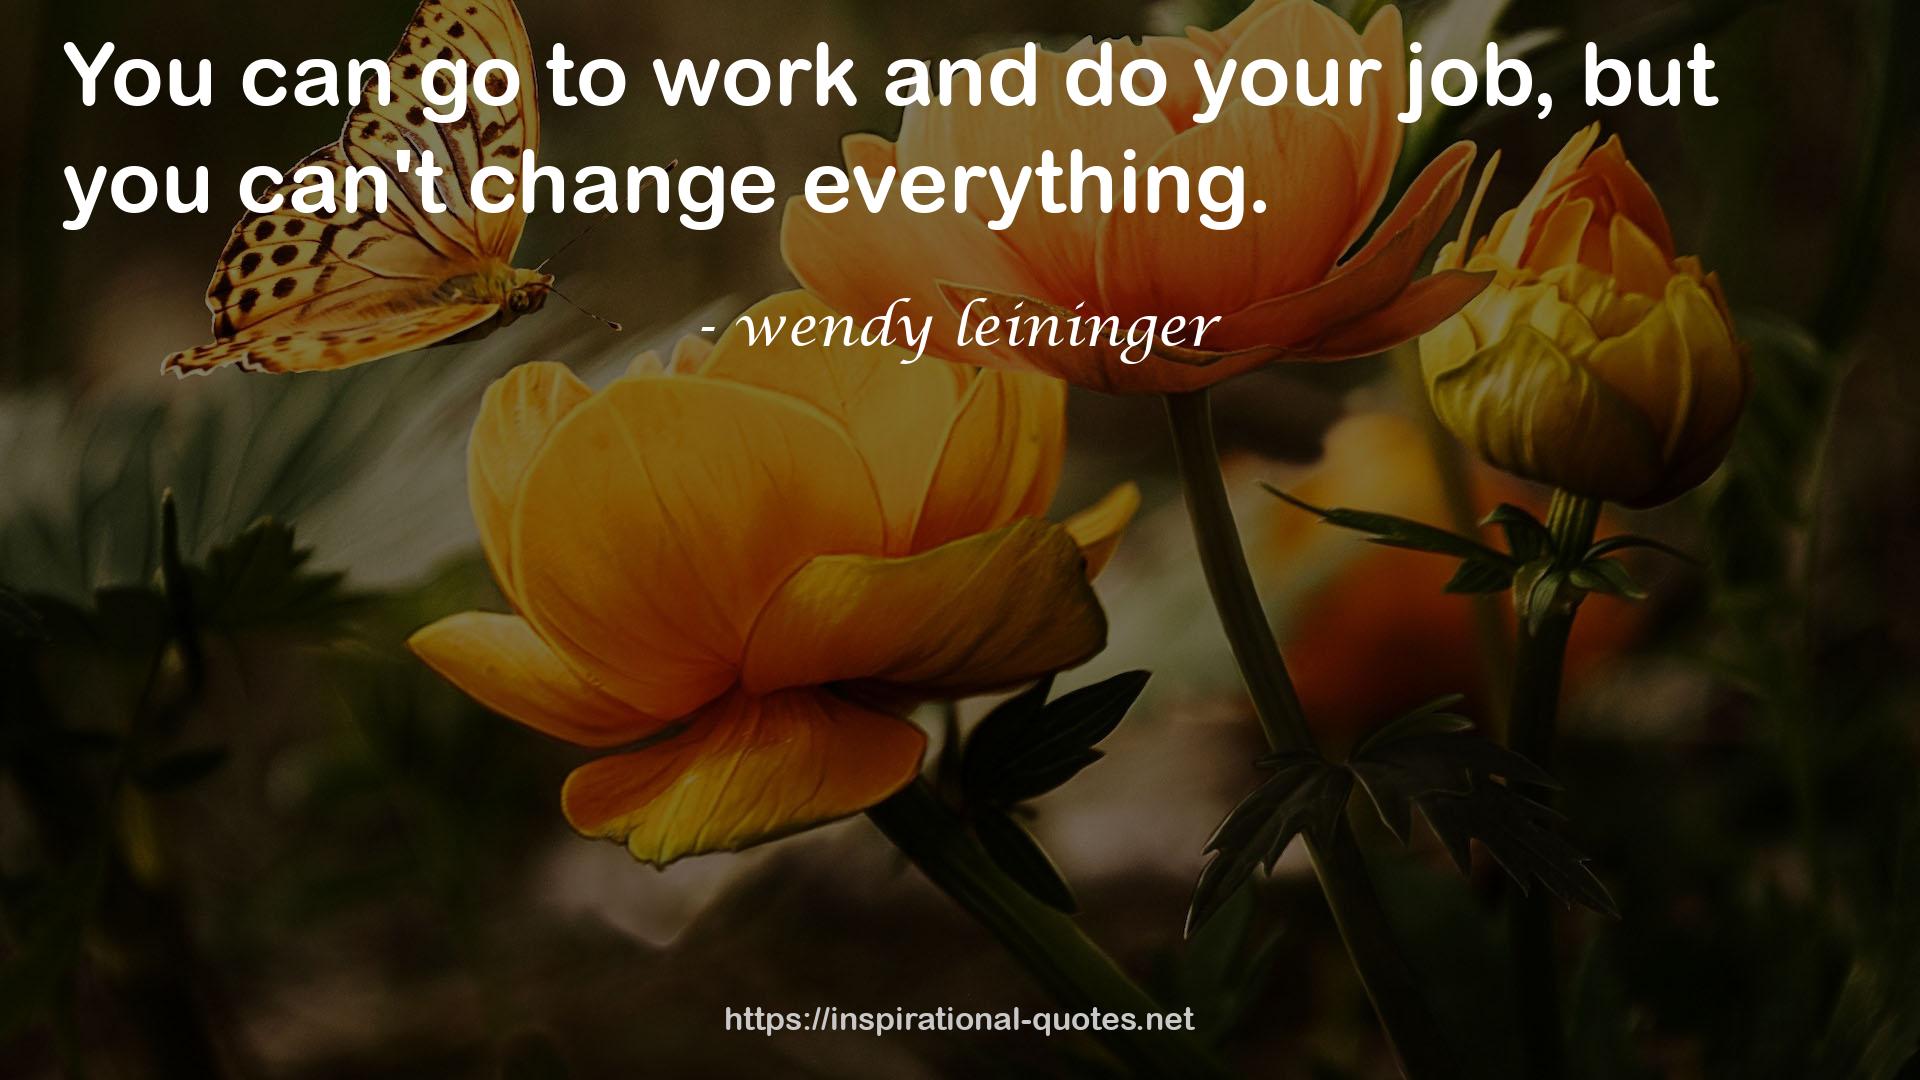 wendy leininger QUOTES